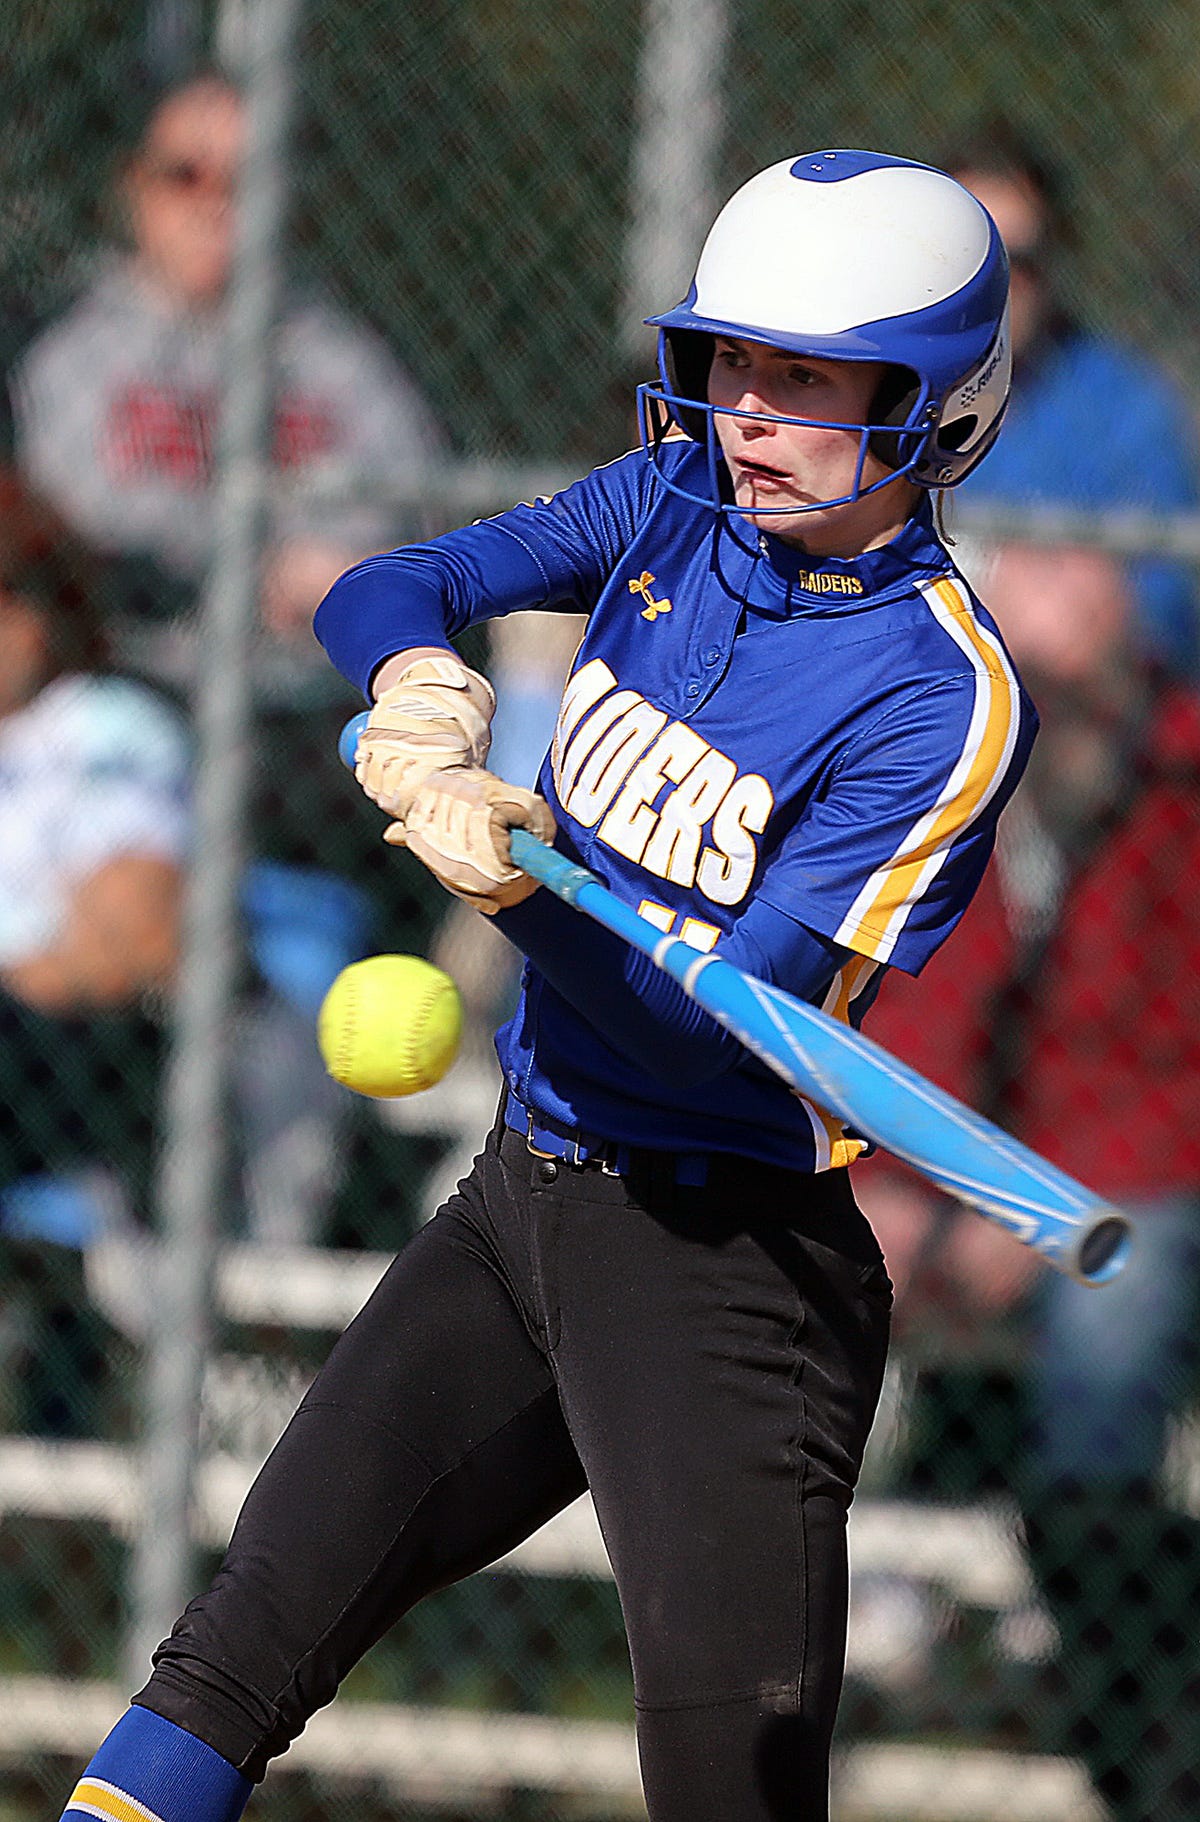 Latest Softball Rankings: GMC & UCC Update with Upsets and Standout Performances